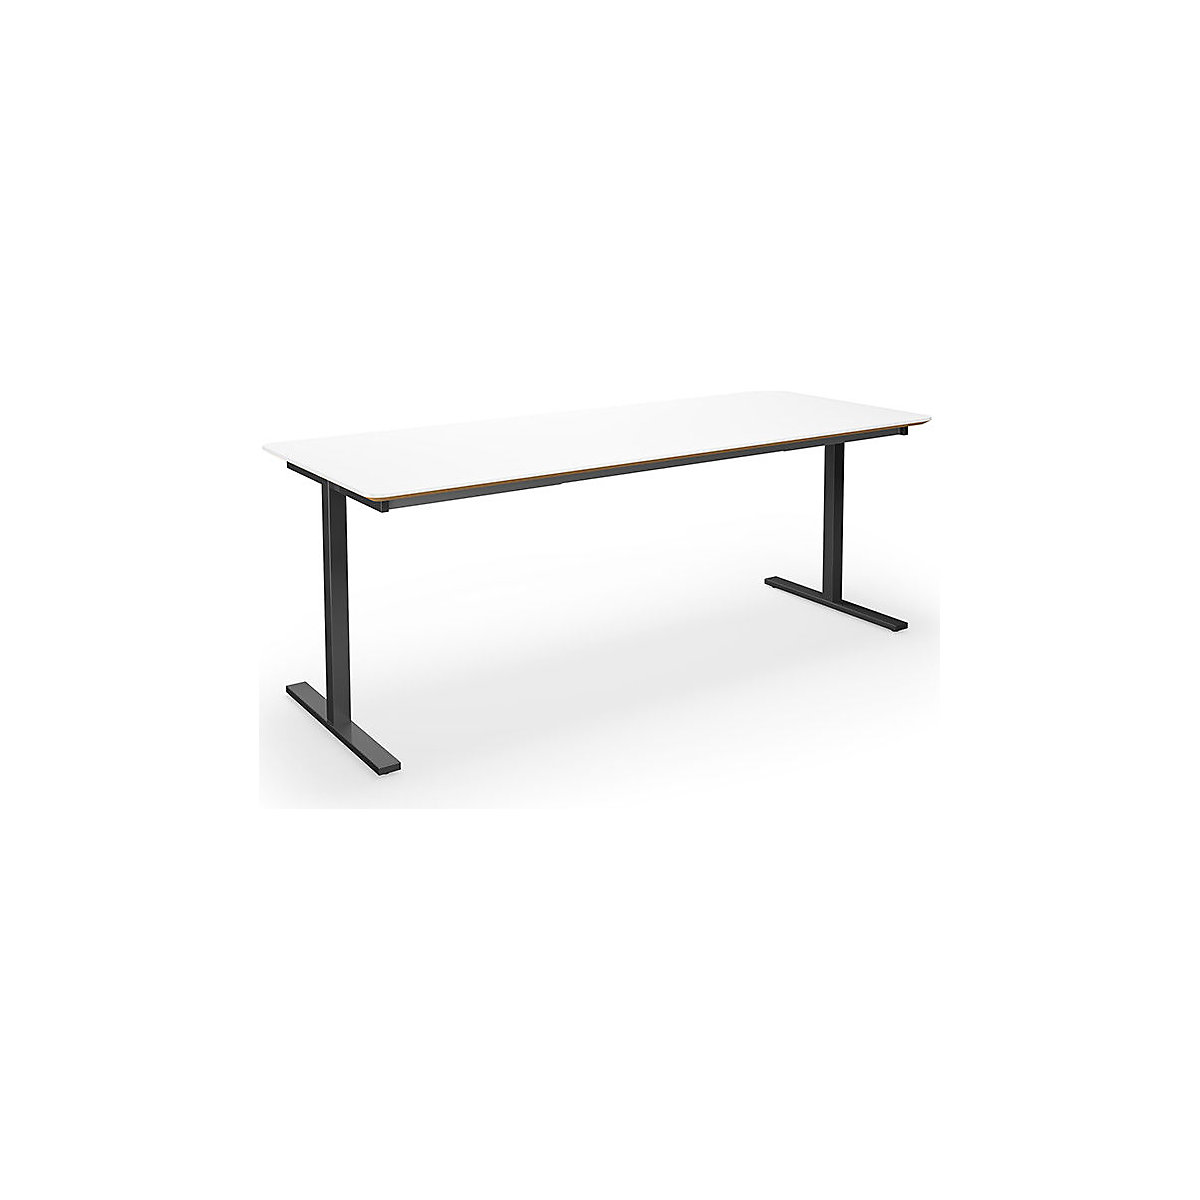 DUO-T Trend multi-purpose desk, straight tabletop, rounded corners, WxD 1800 x 800 mm, white, black-4